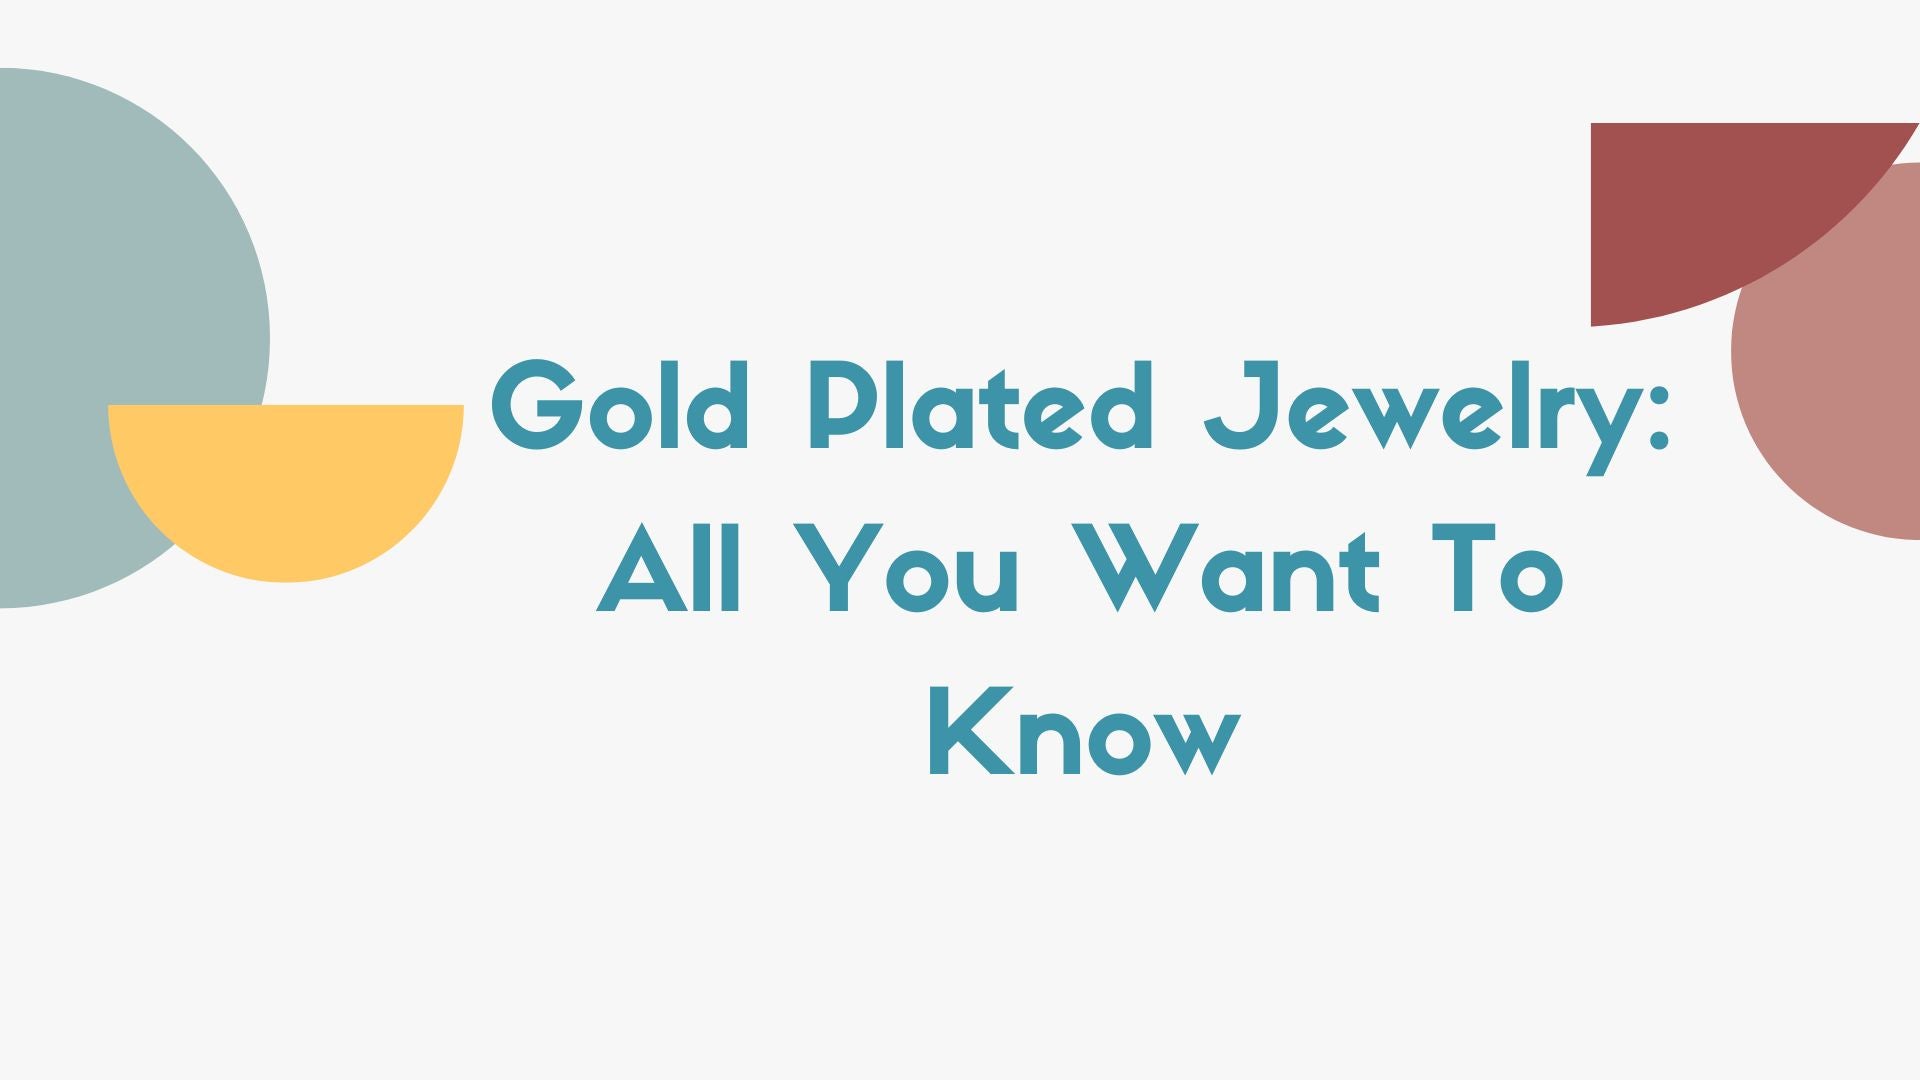 Gold Plated Jewelry: All You Want To Know